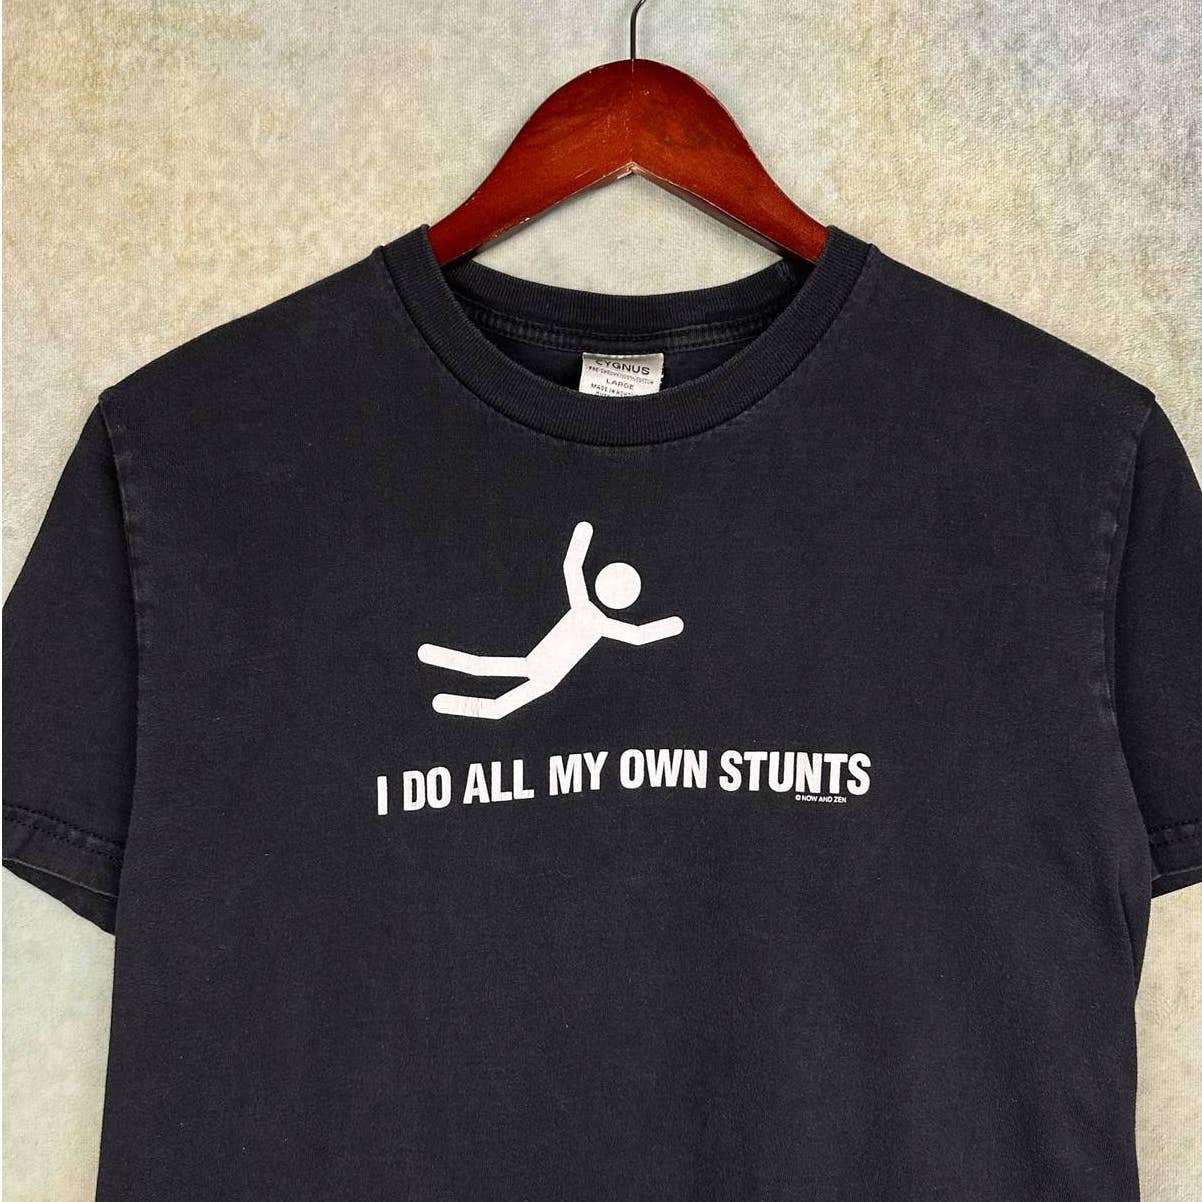 Vintage I Do All My Own Stunts Graphic T Shirt L